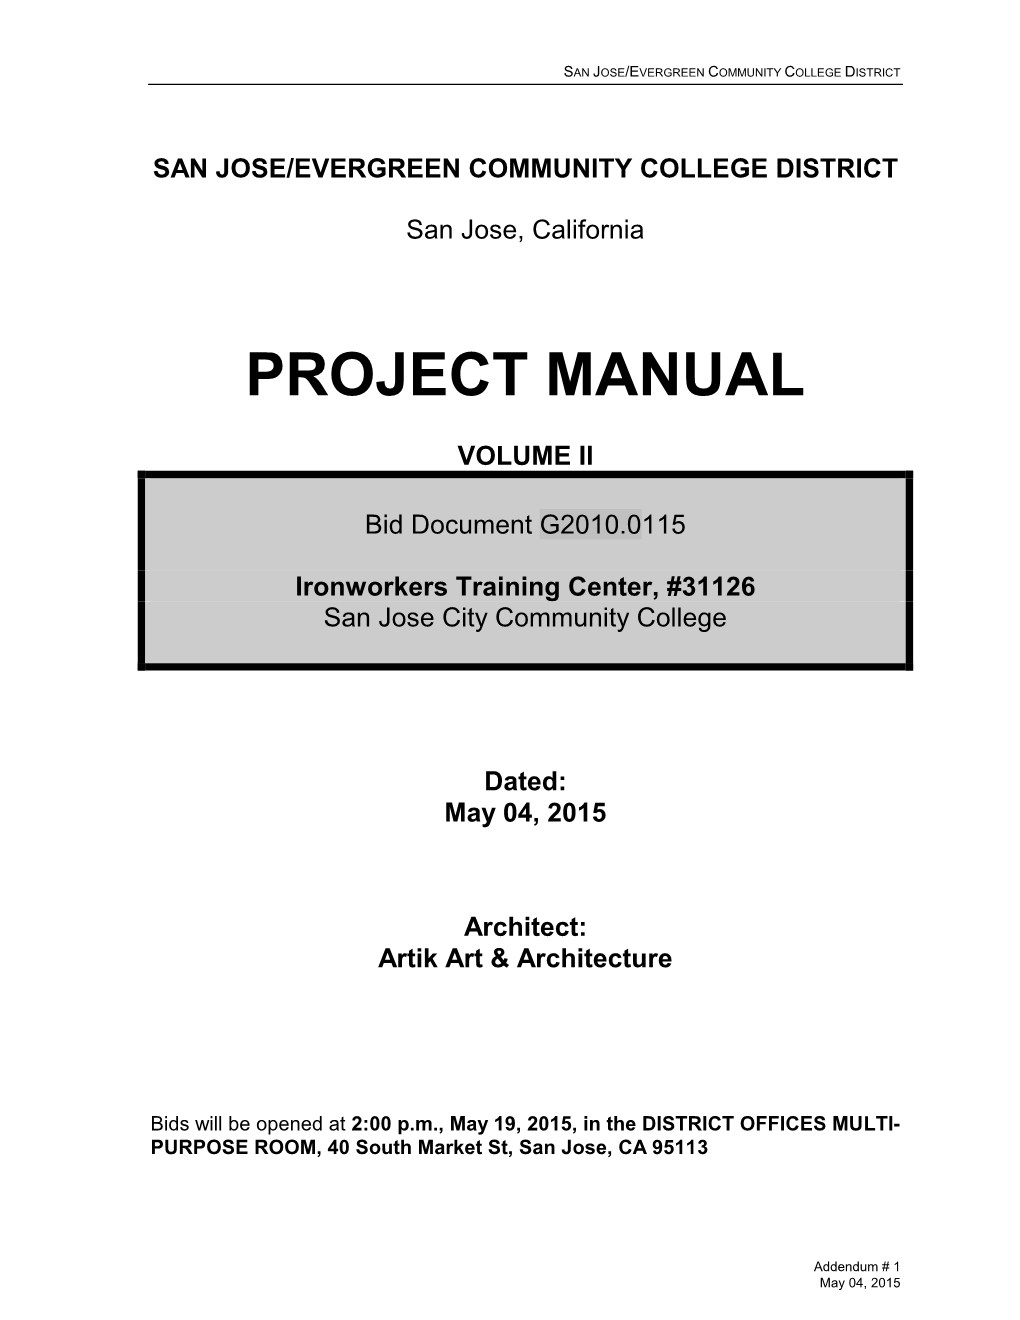 Project Manual